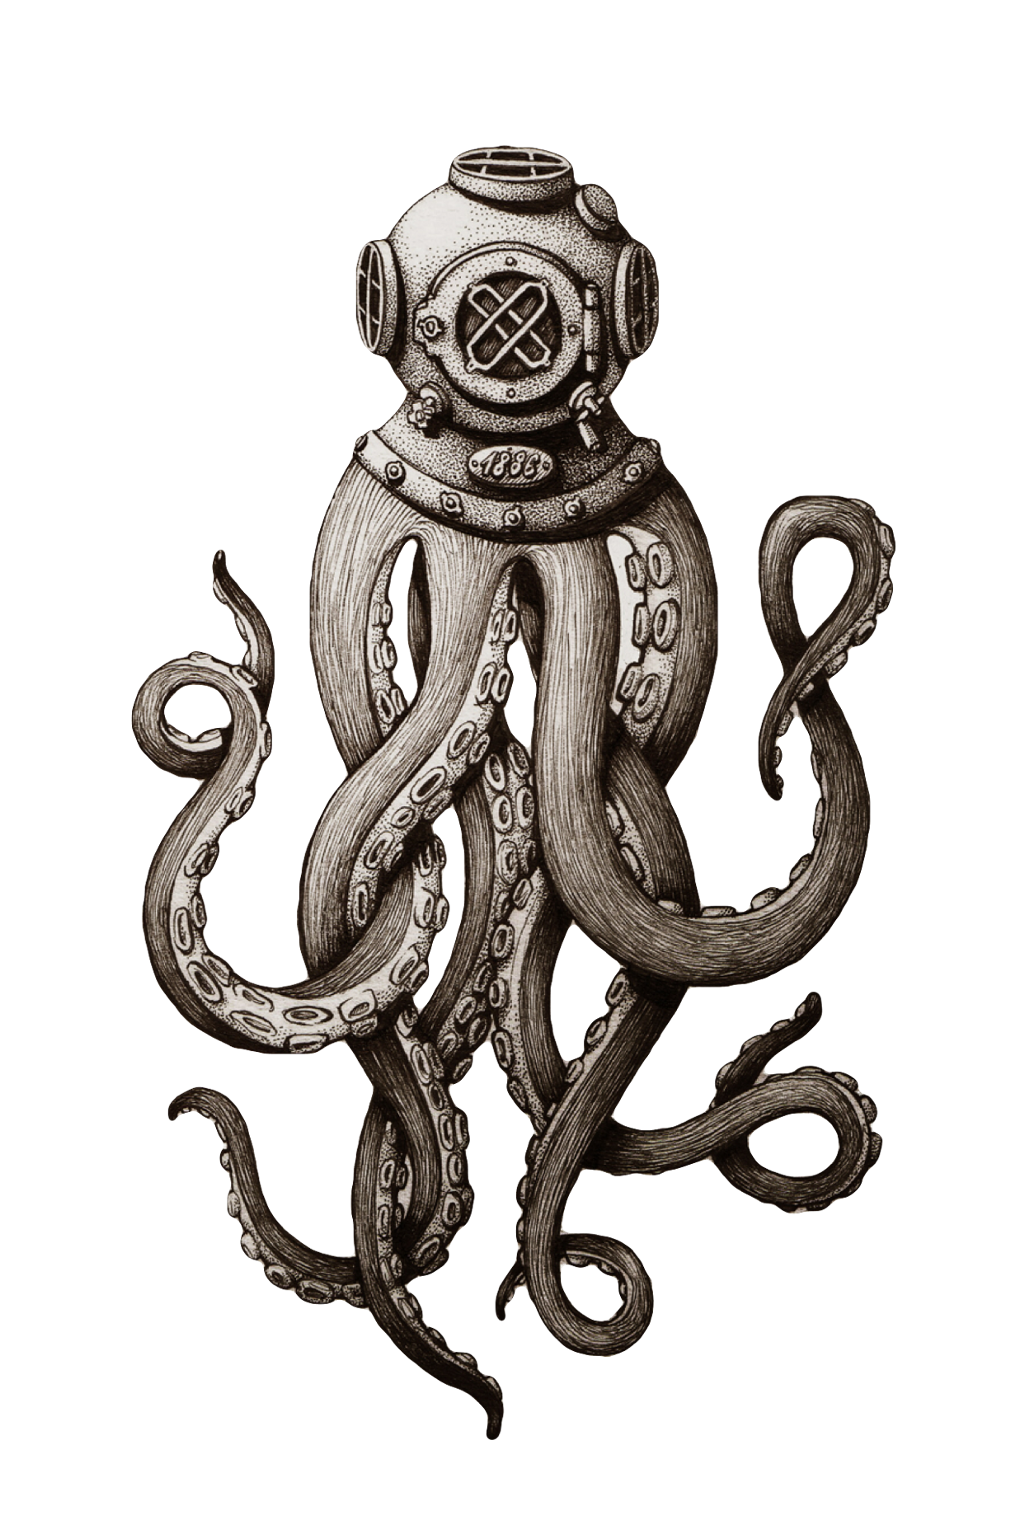 Octopus Tentacles Drawing Best